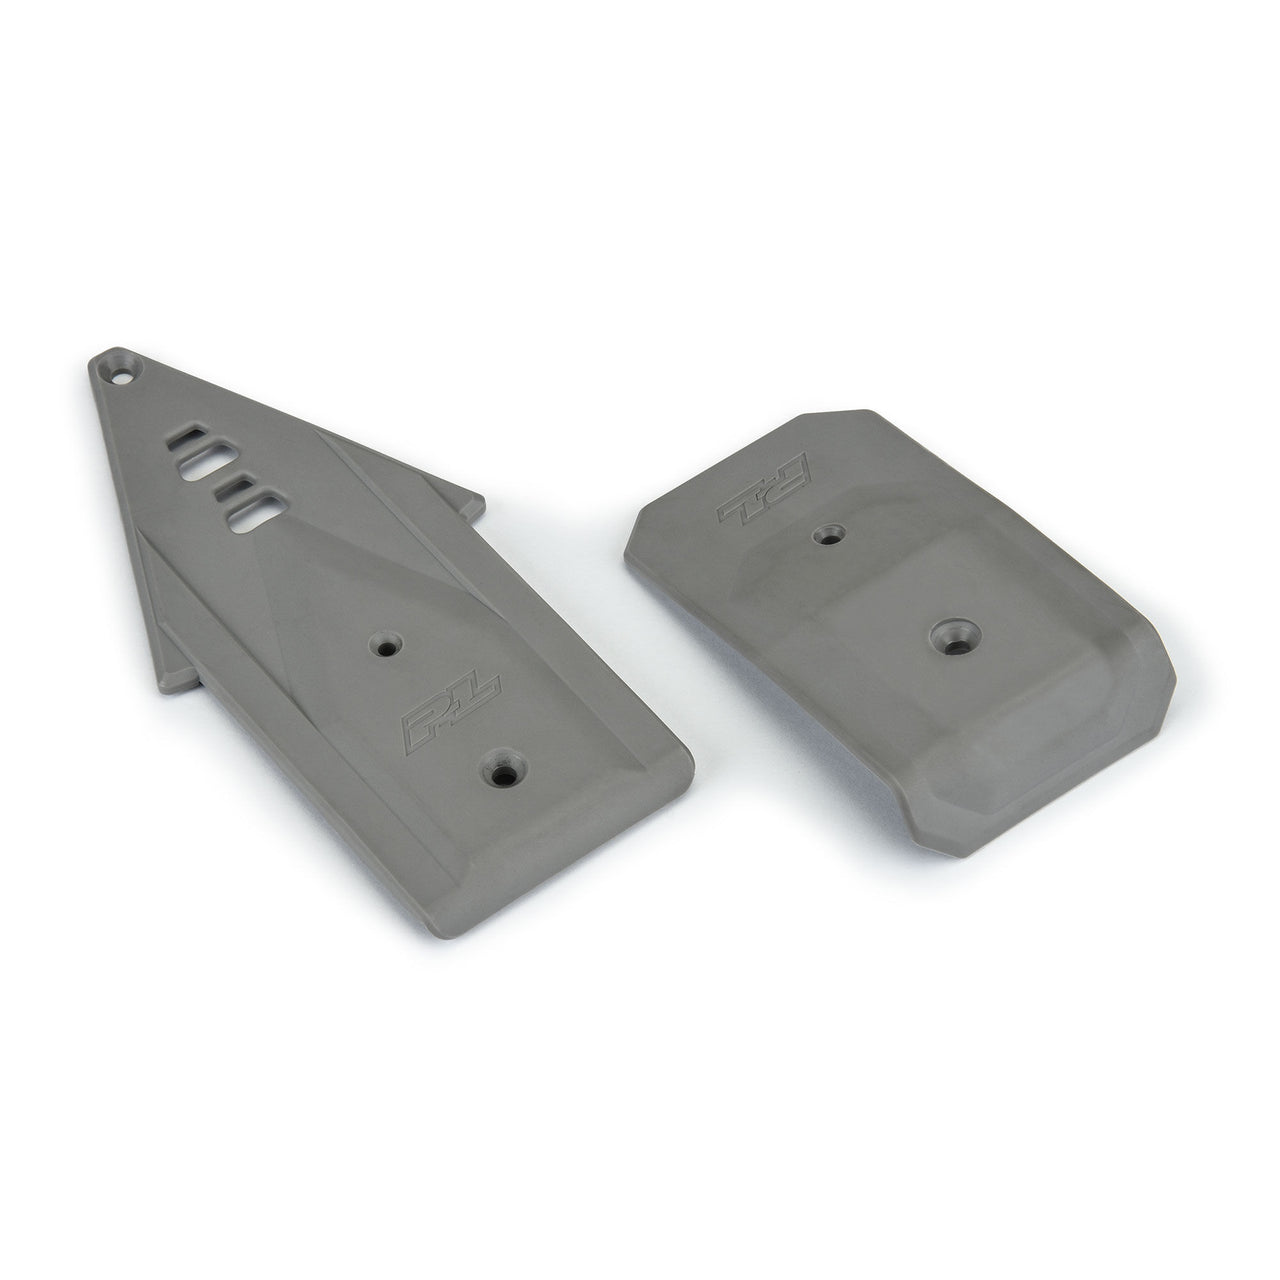 PRO639505 Bash Armor Front/Rear Skid Plates (Stone Gray) for ARRMA 3S Vehicles